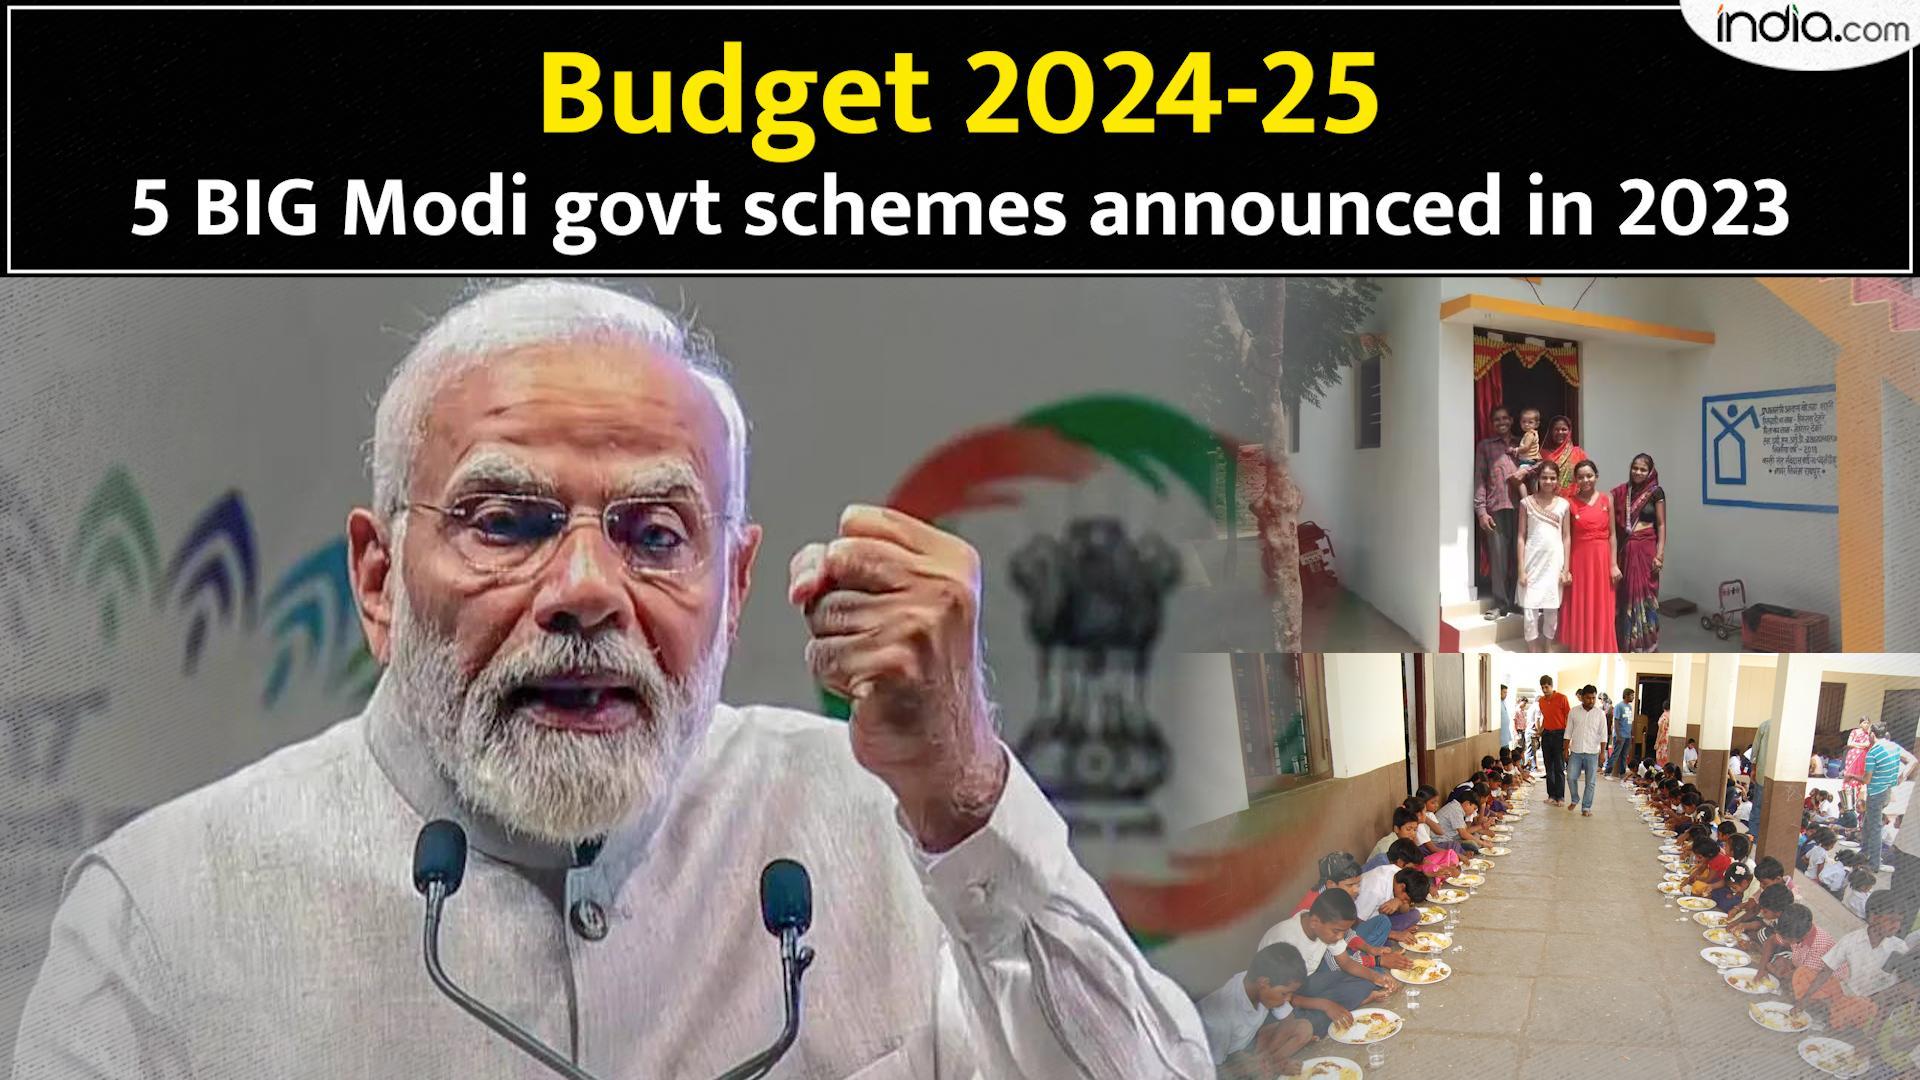 Budget 2024 Updates Latest News, Videos and Photos on Budget 2024